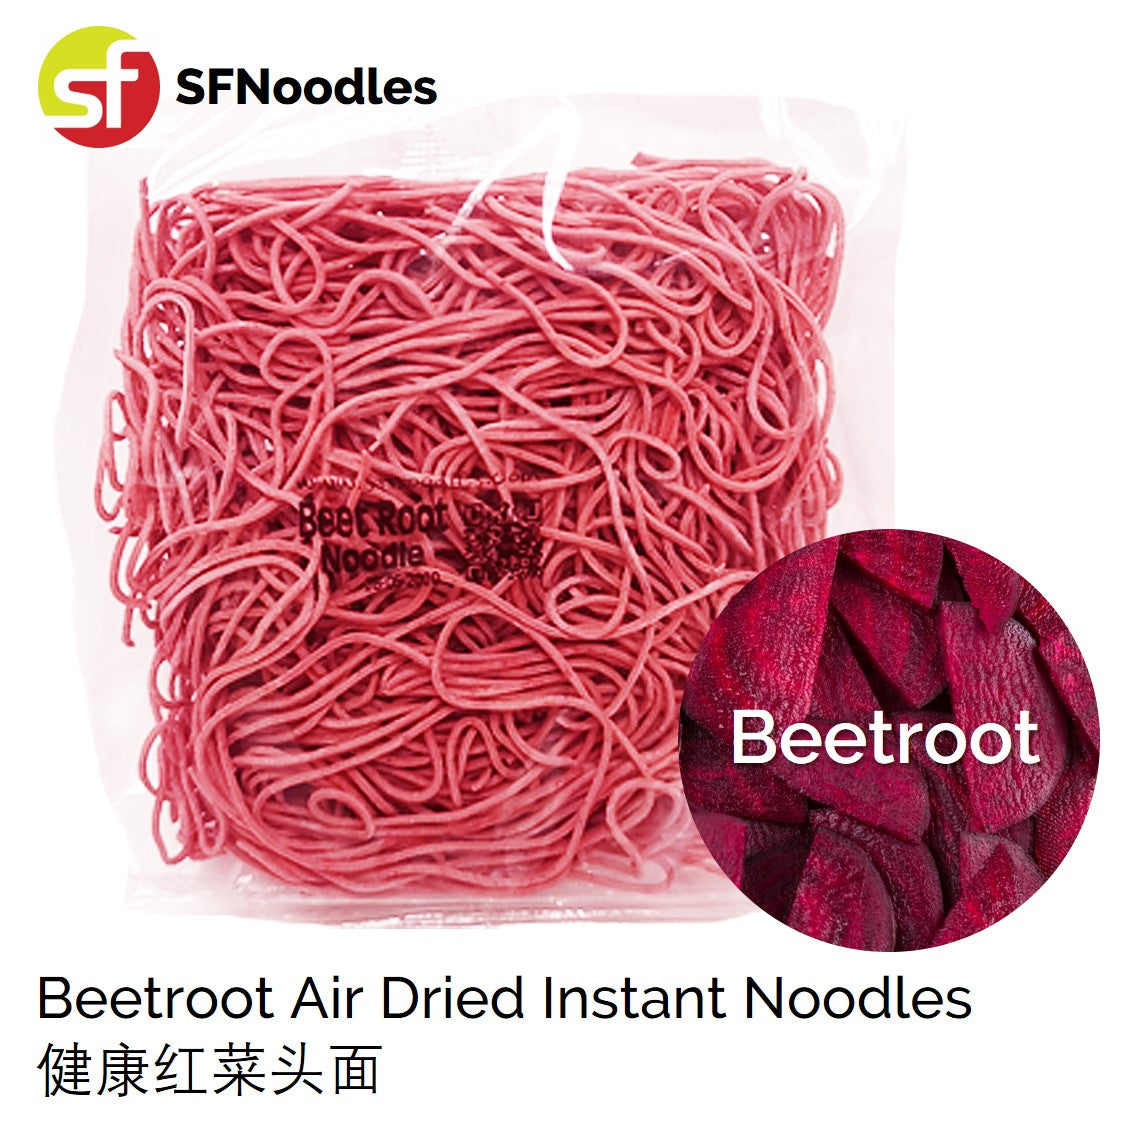 Beetroot Air Dried Instant Noodles (健康红菜头面)